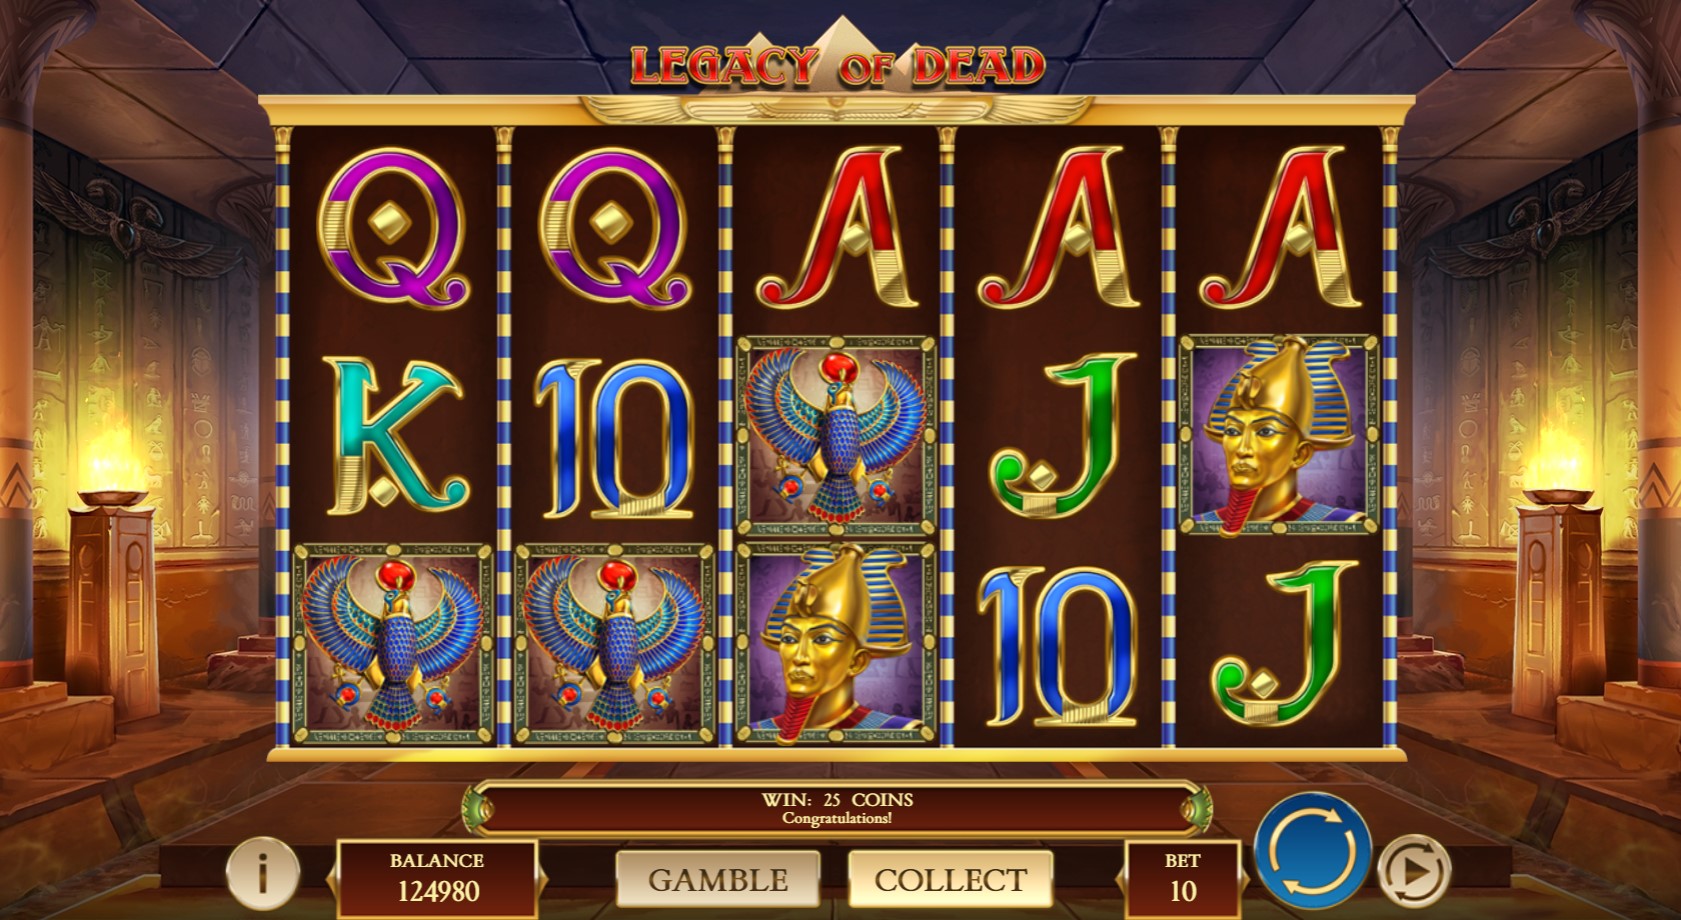 Top Online Casino Sites for Legacy of Dead